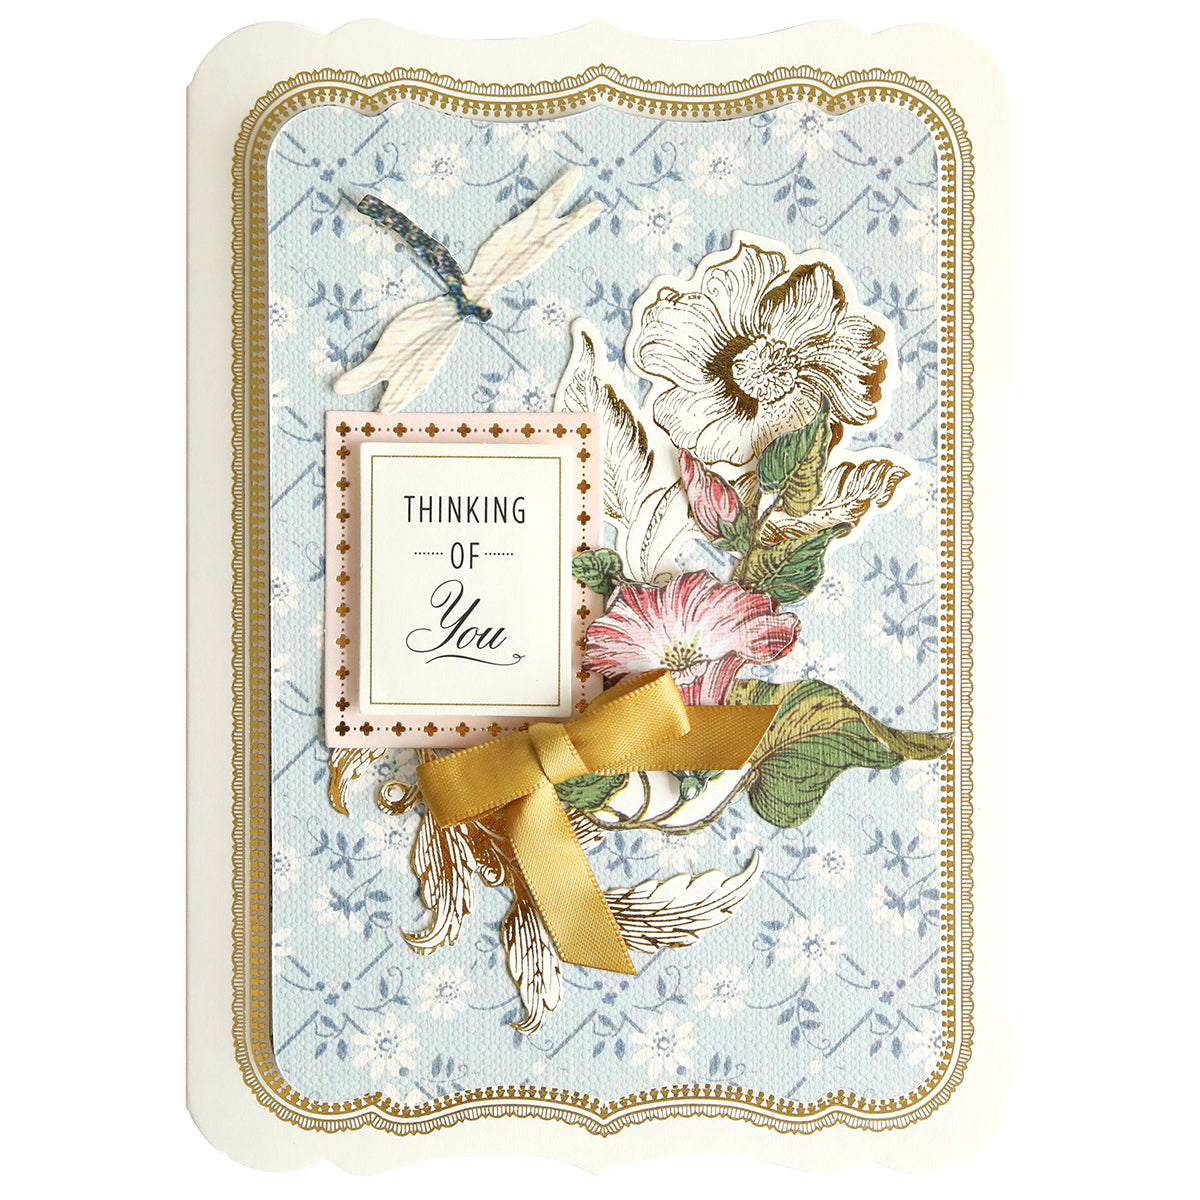 Simply Wildflower Meadow Card Making Kit with a wildflower meadow design and "thinking of you" message, featuring 3D embellishments.